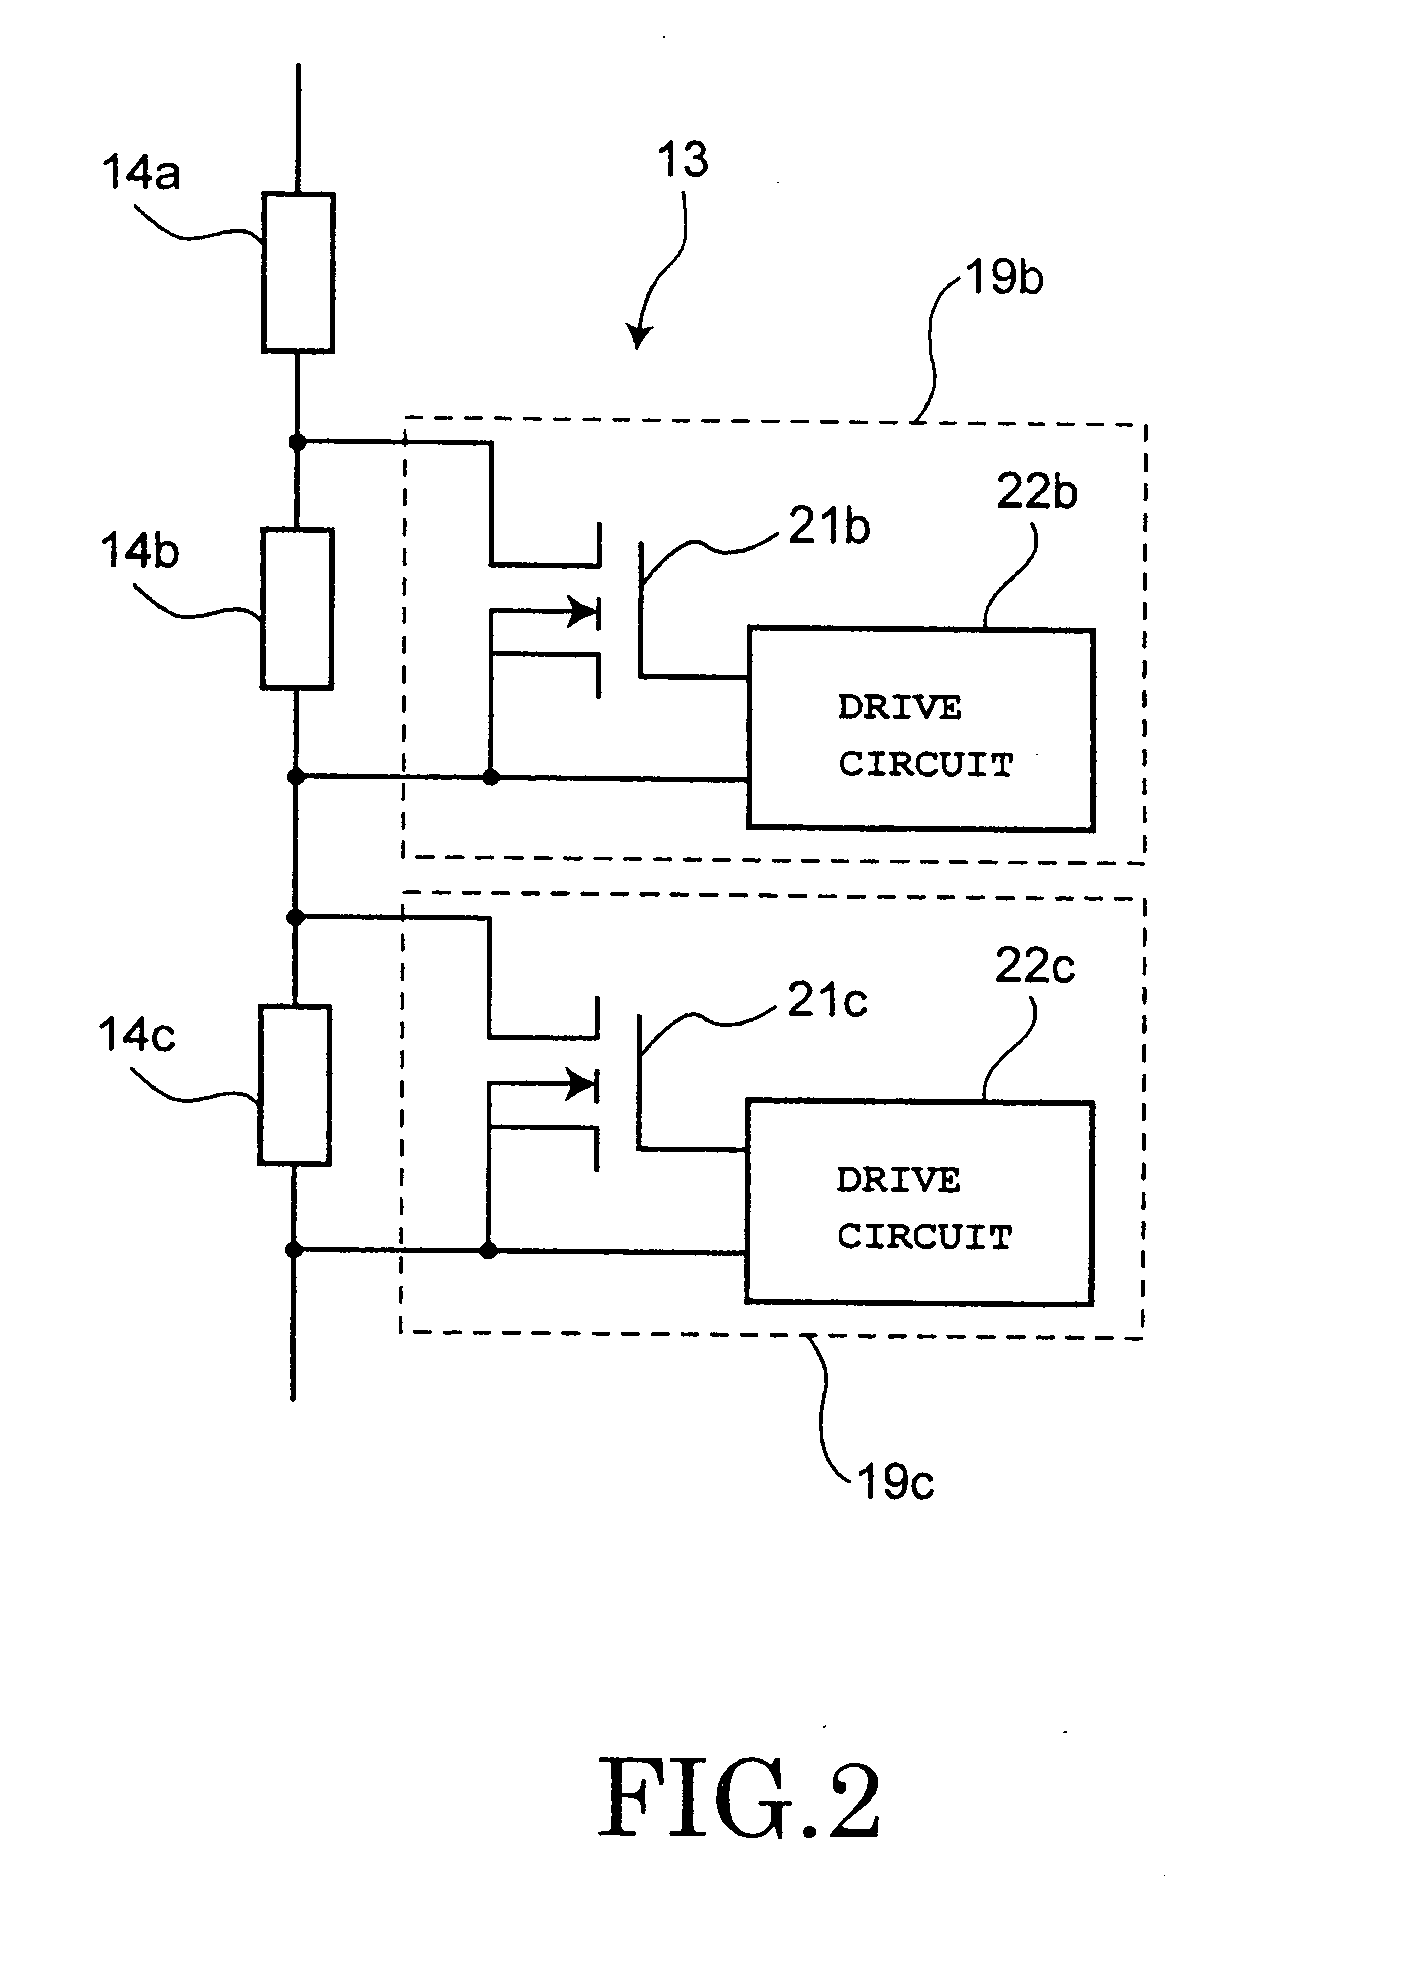 Switching element drive circuit